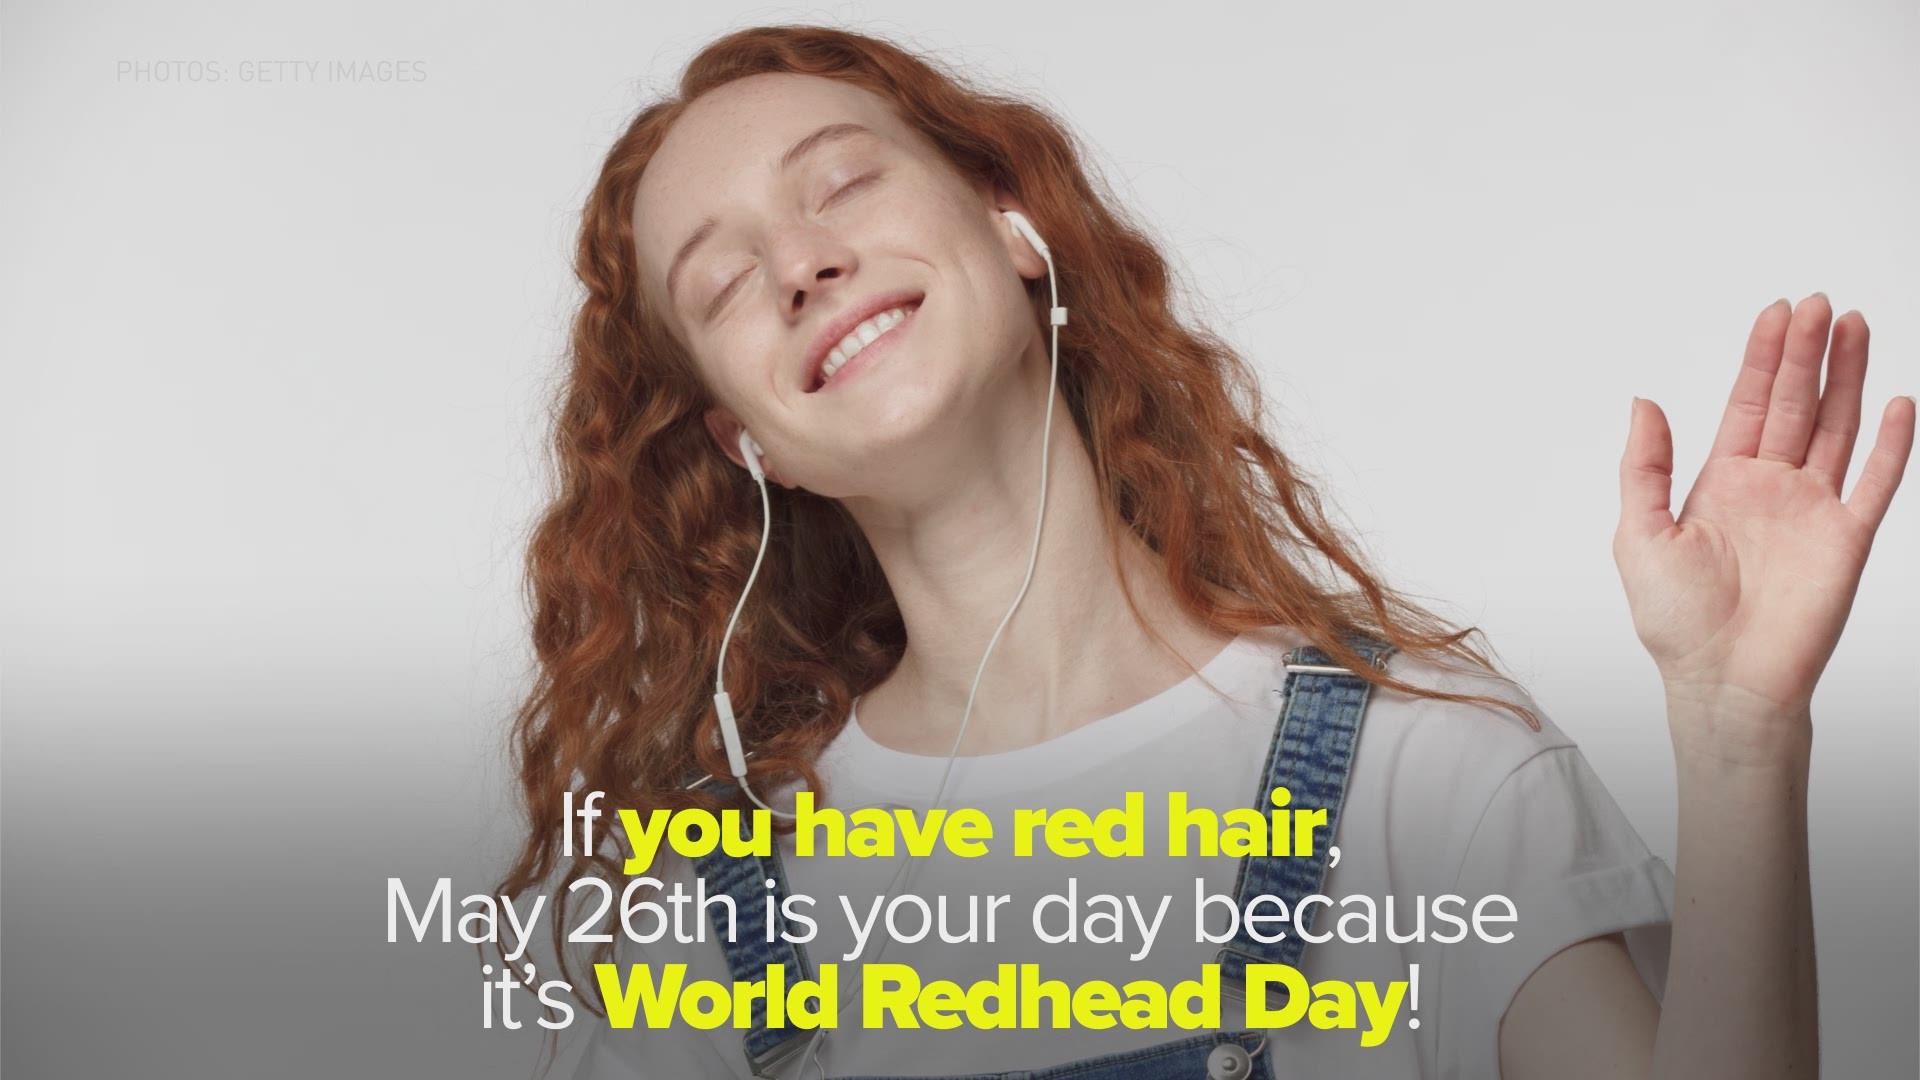 World Redhead Day is May 26! 10 fun facts about having red hair